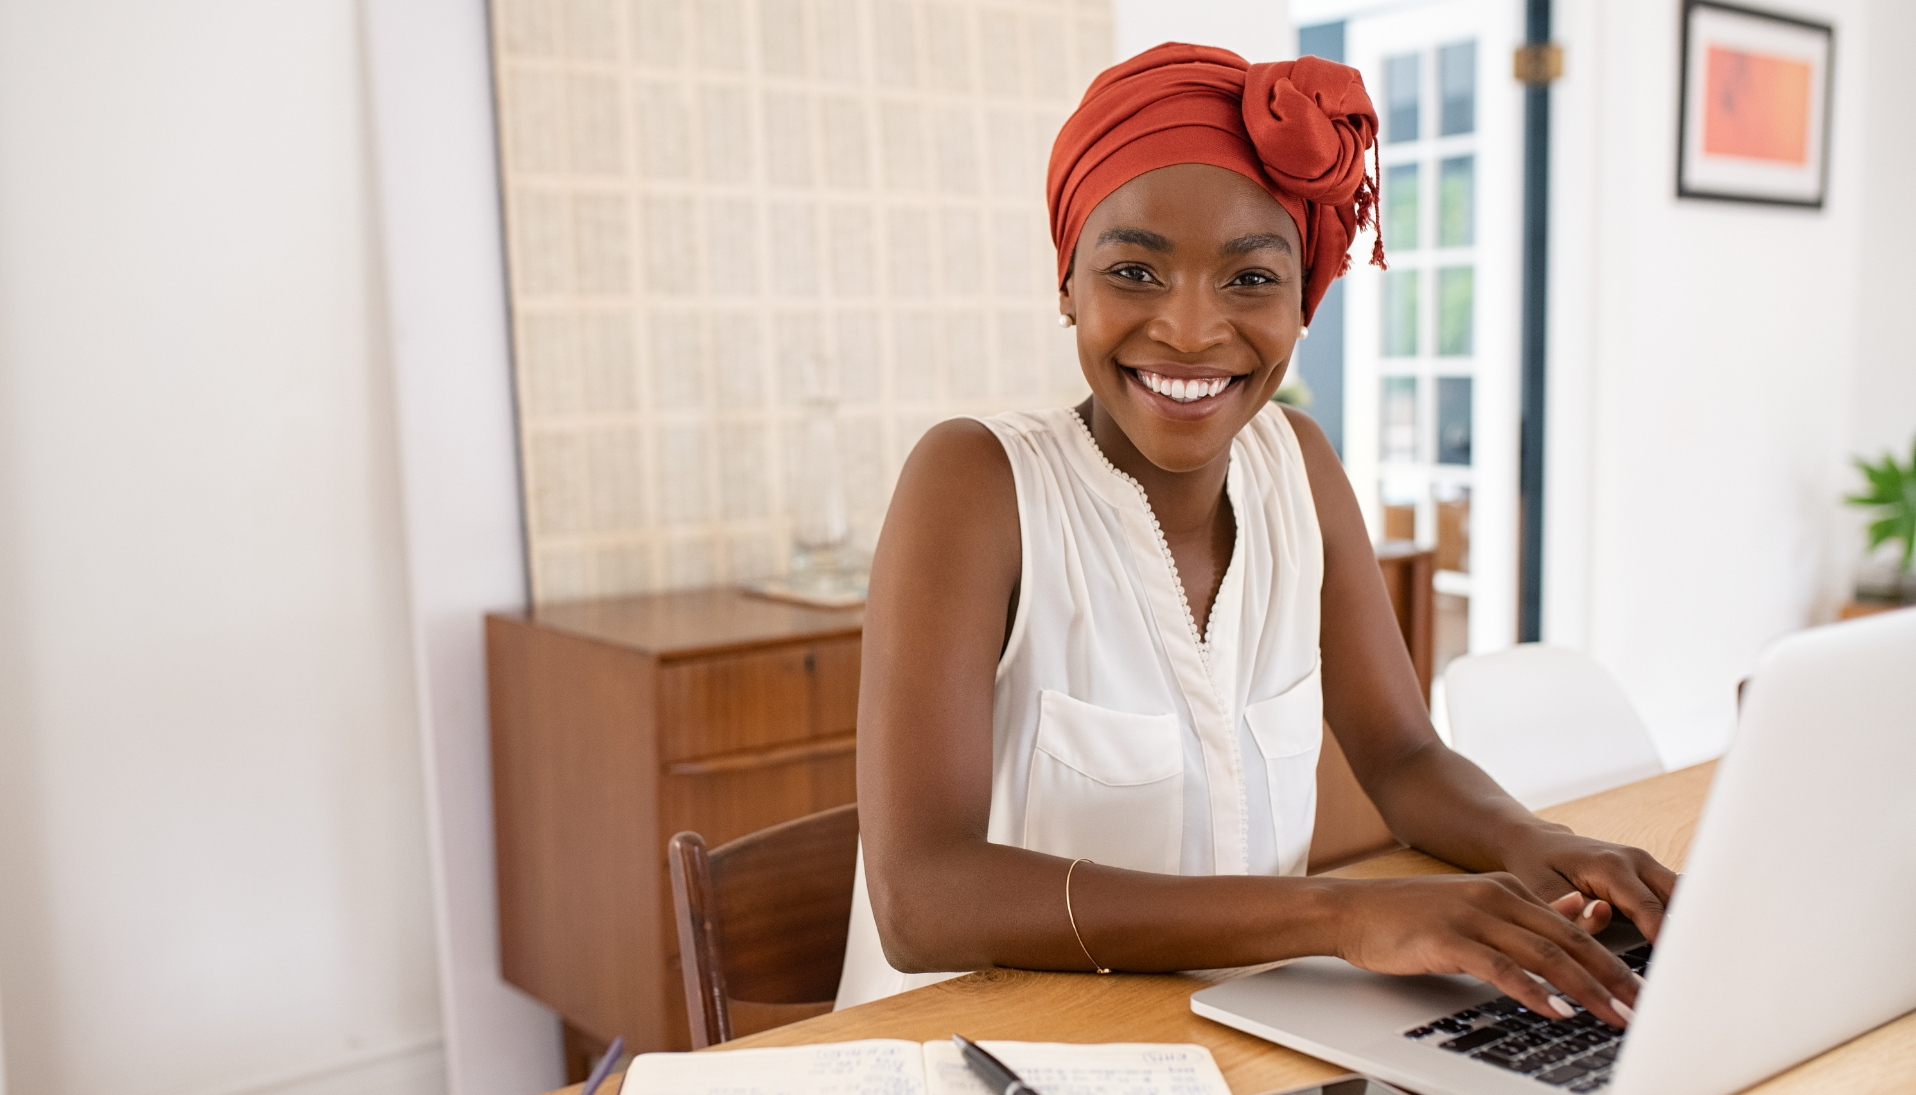 A woman smiles at the camera as she is happily working from home following mental health tips